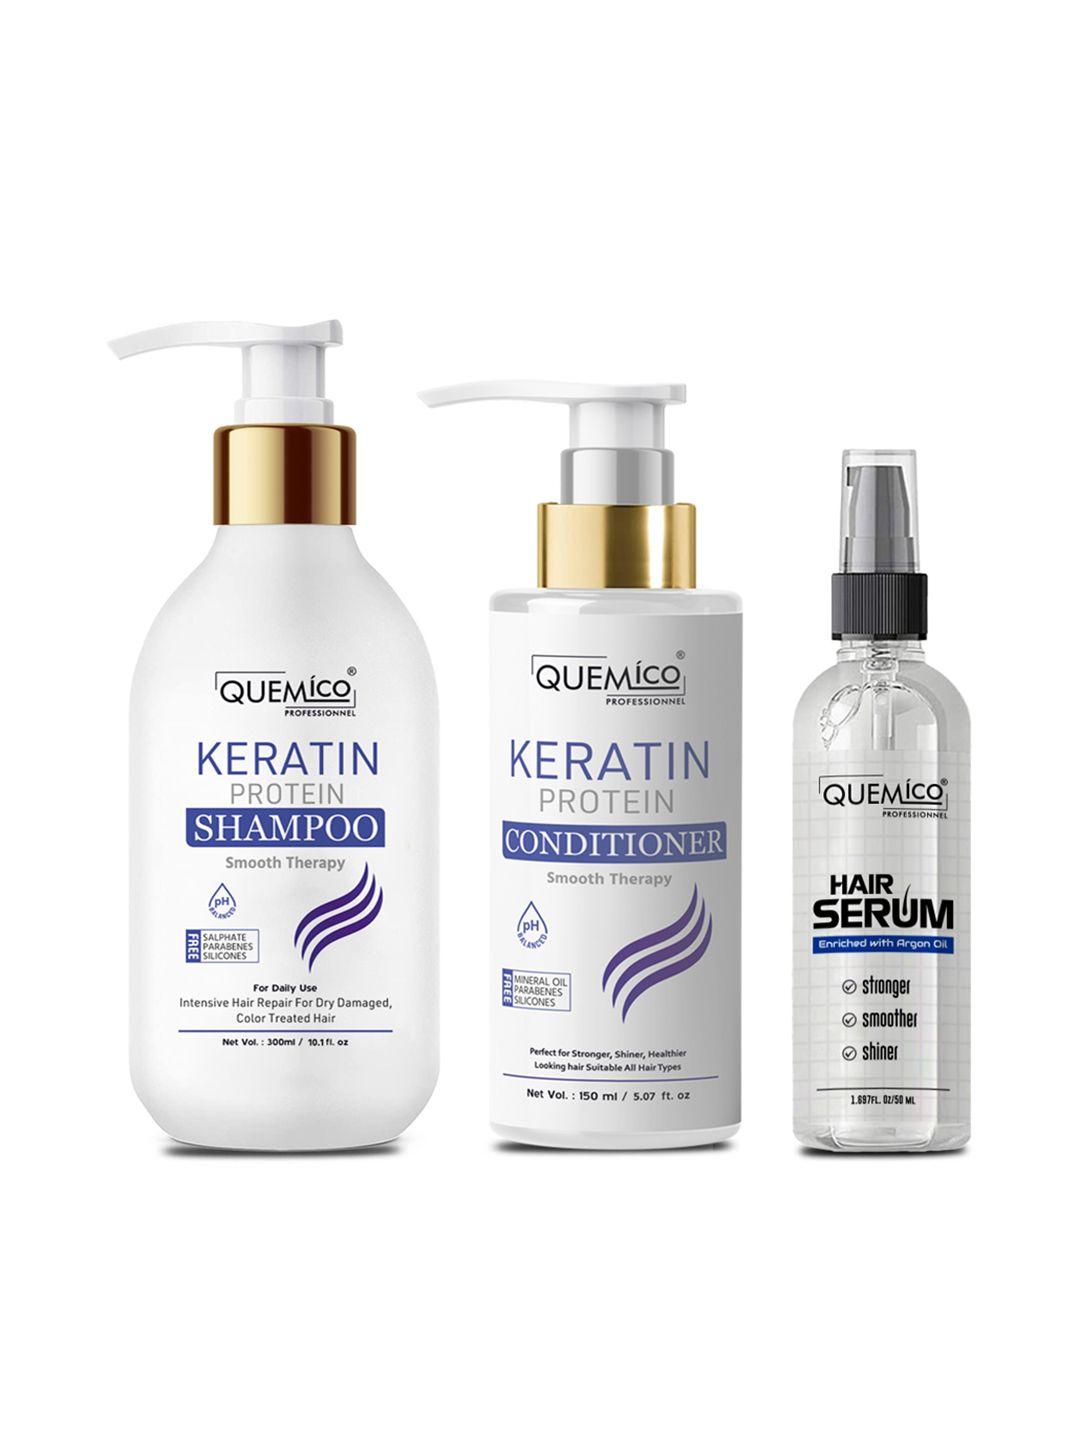 quemico professionnel sulphate free keratin protein smooth shampoo & conditioner with professional hair serum set